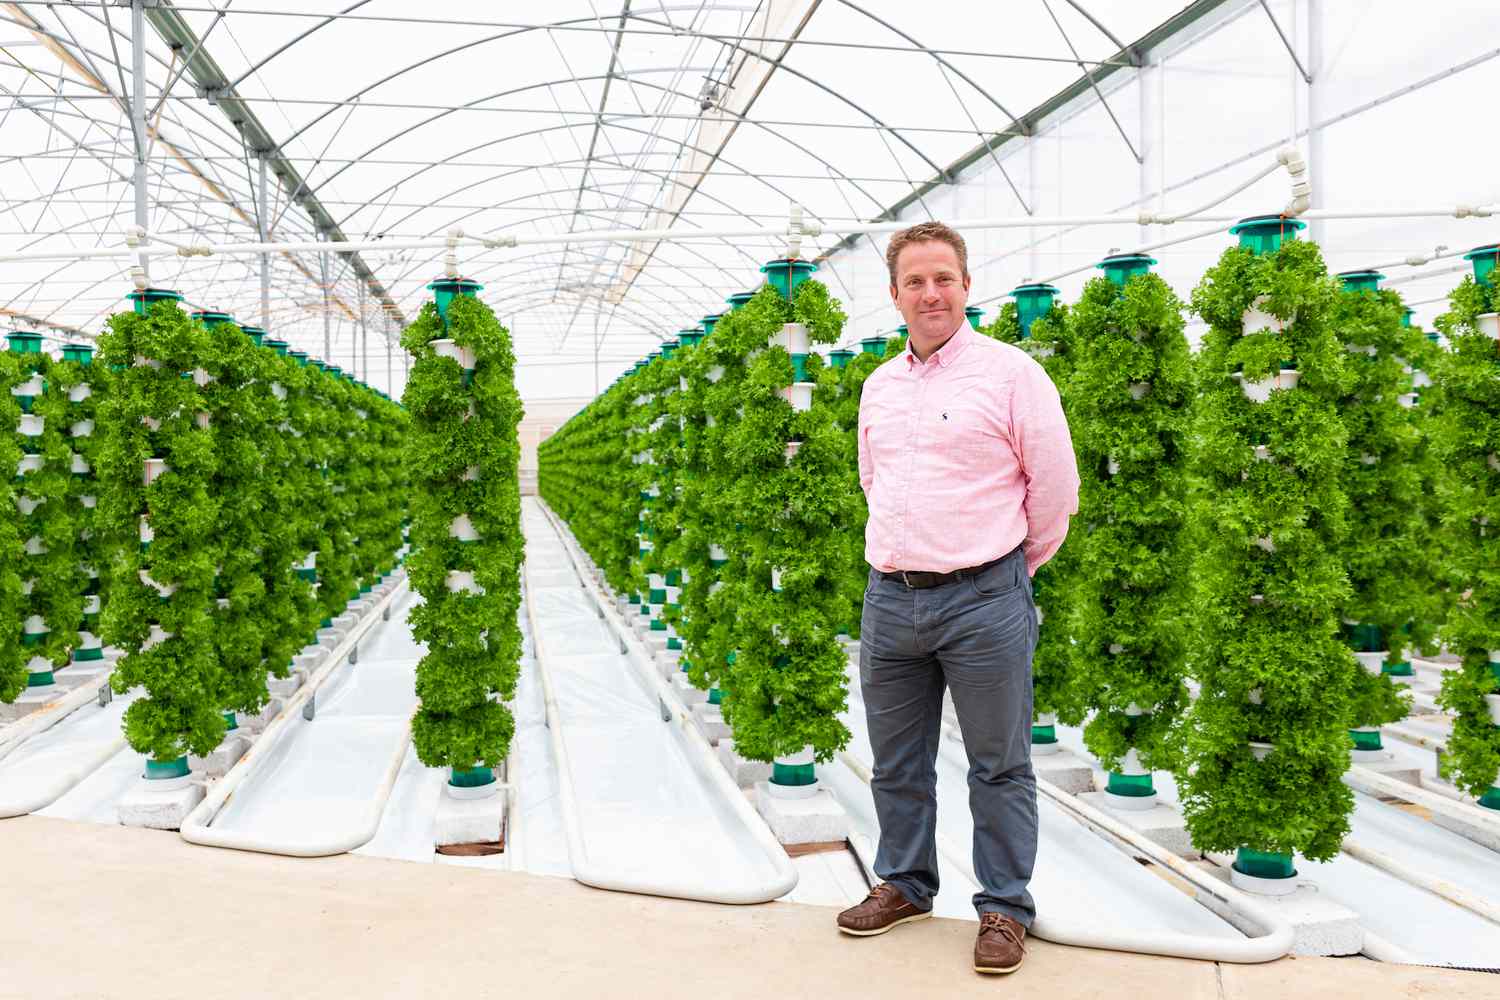 hippo-harvest-secures-21m-funding-to-revolutionize-lettuce-farming-with-robotics-and-ai